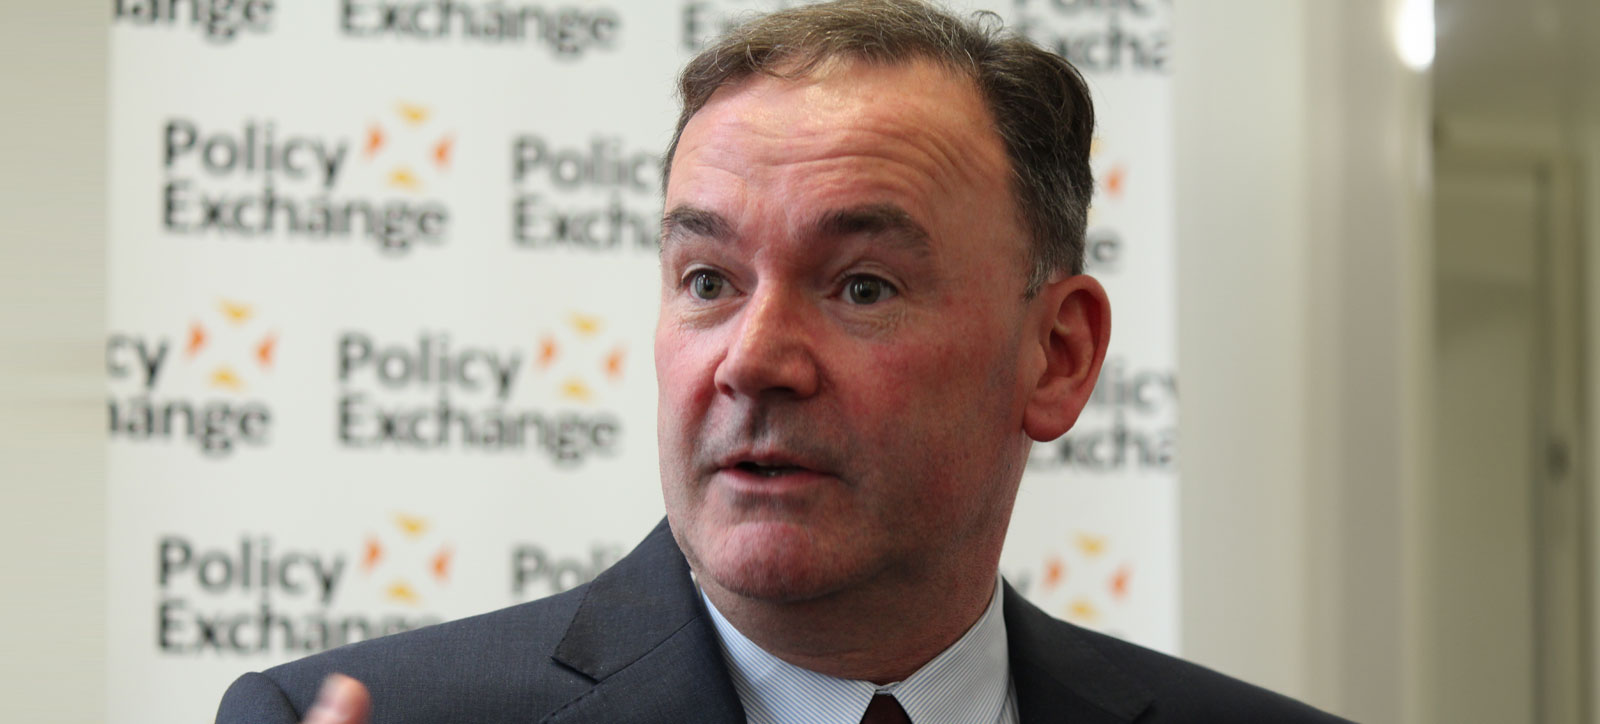 A photograph of Jon Cruddas MP speaking at a Policy Exchange event. Copyright is owned by the Policy Exchange and the image is shared with permission for use under creative commons.